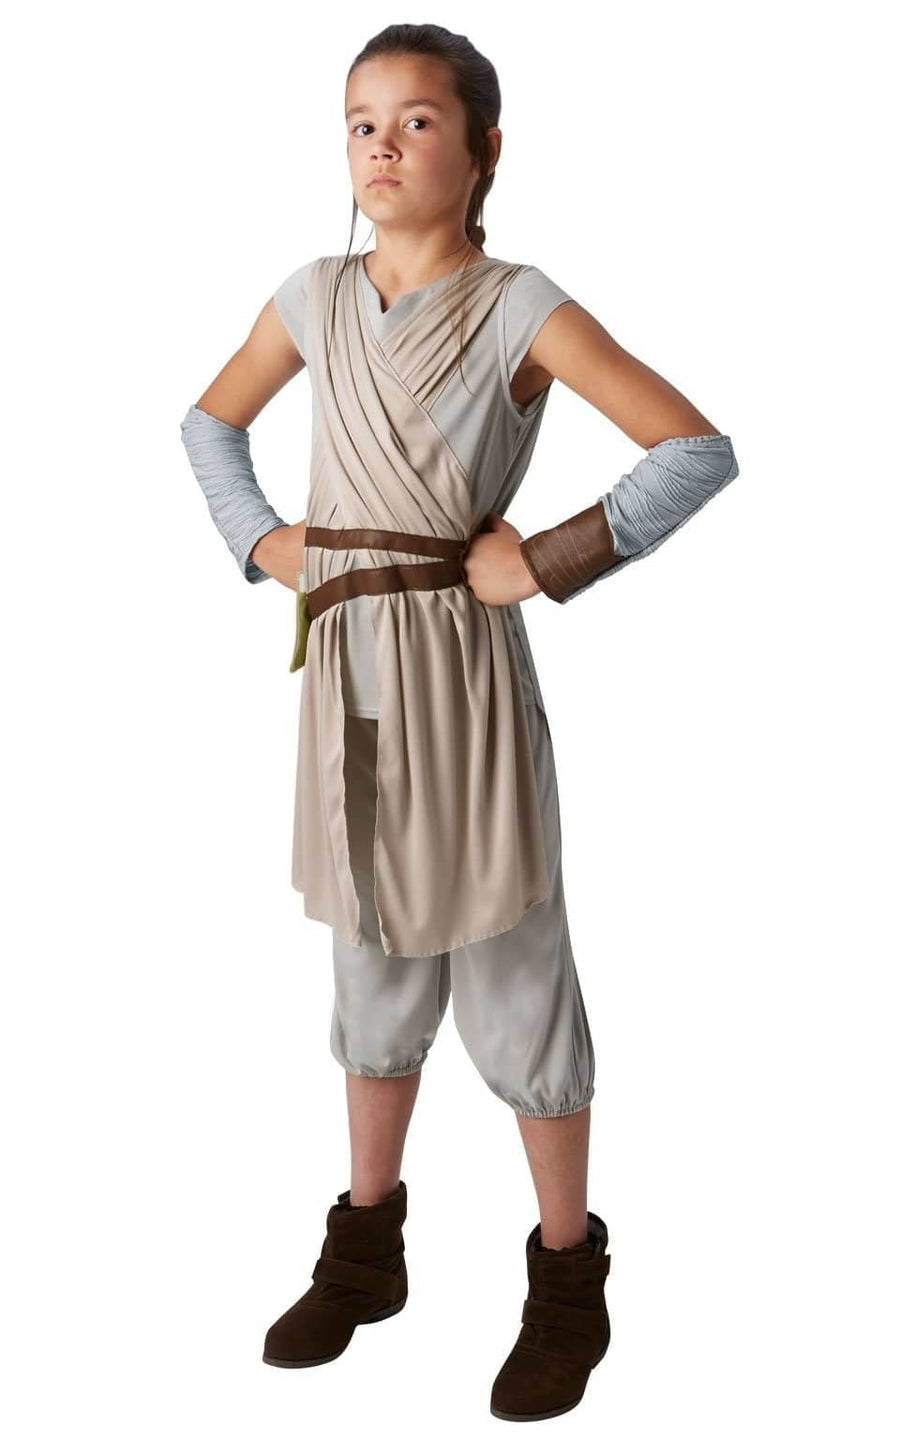 Star Wars The Force Awakens Rey Deluxe_1 rub-6203261112